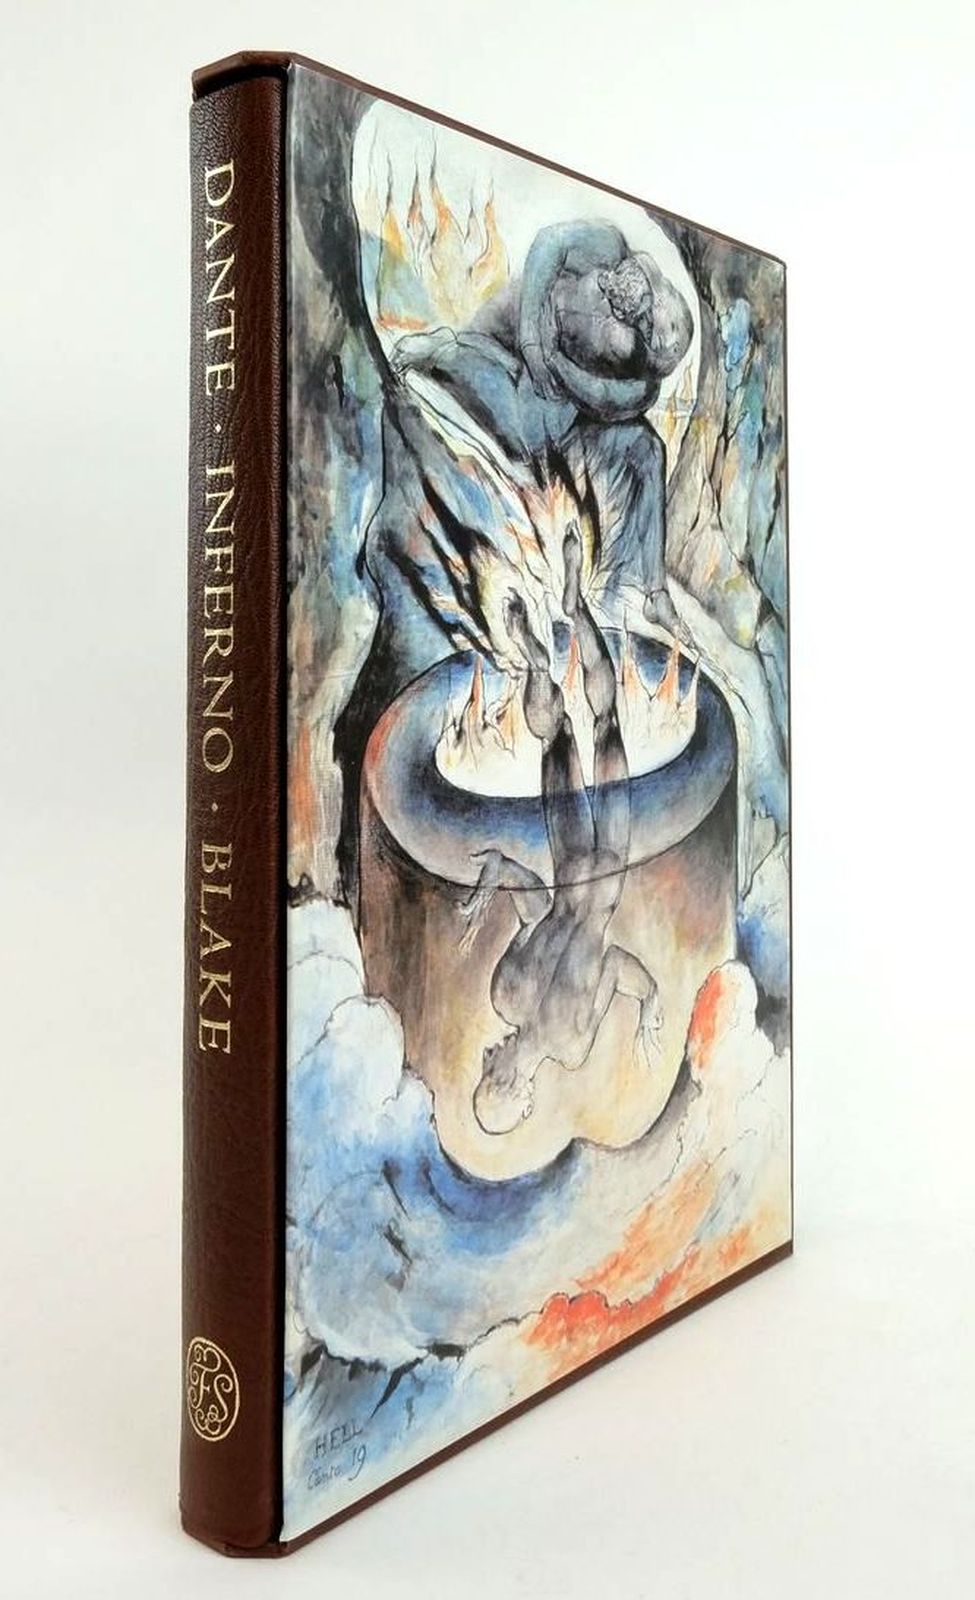 Photo of INFERNO written by Alighieri, Dante Cary, Henry Francis Hamlyn, Robin illustrated by Blake, William published by Folio Society (STOCK CODE: 1823016)  for sale by Stella & Rose's Books